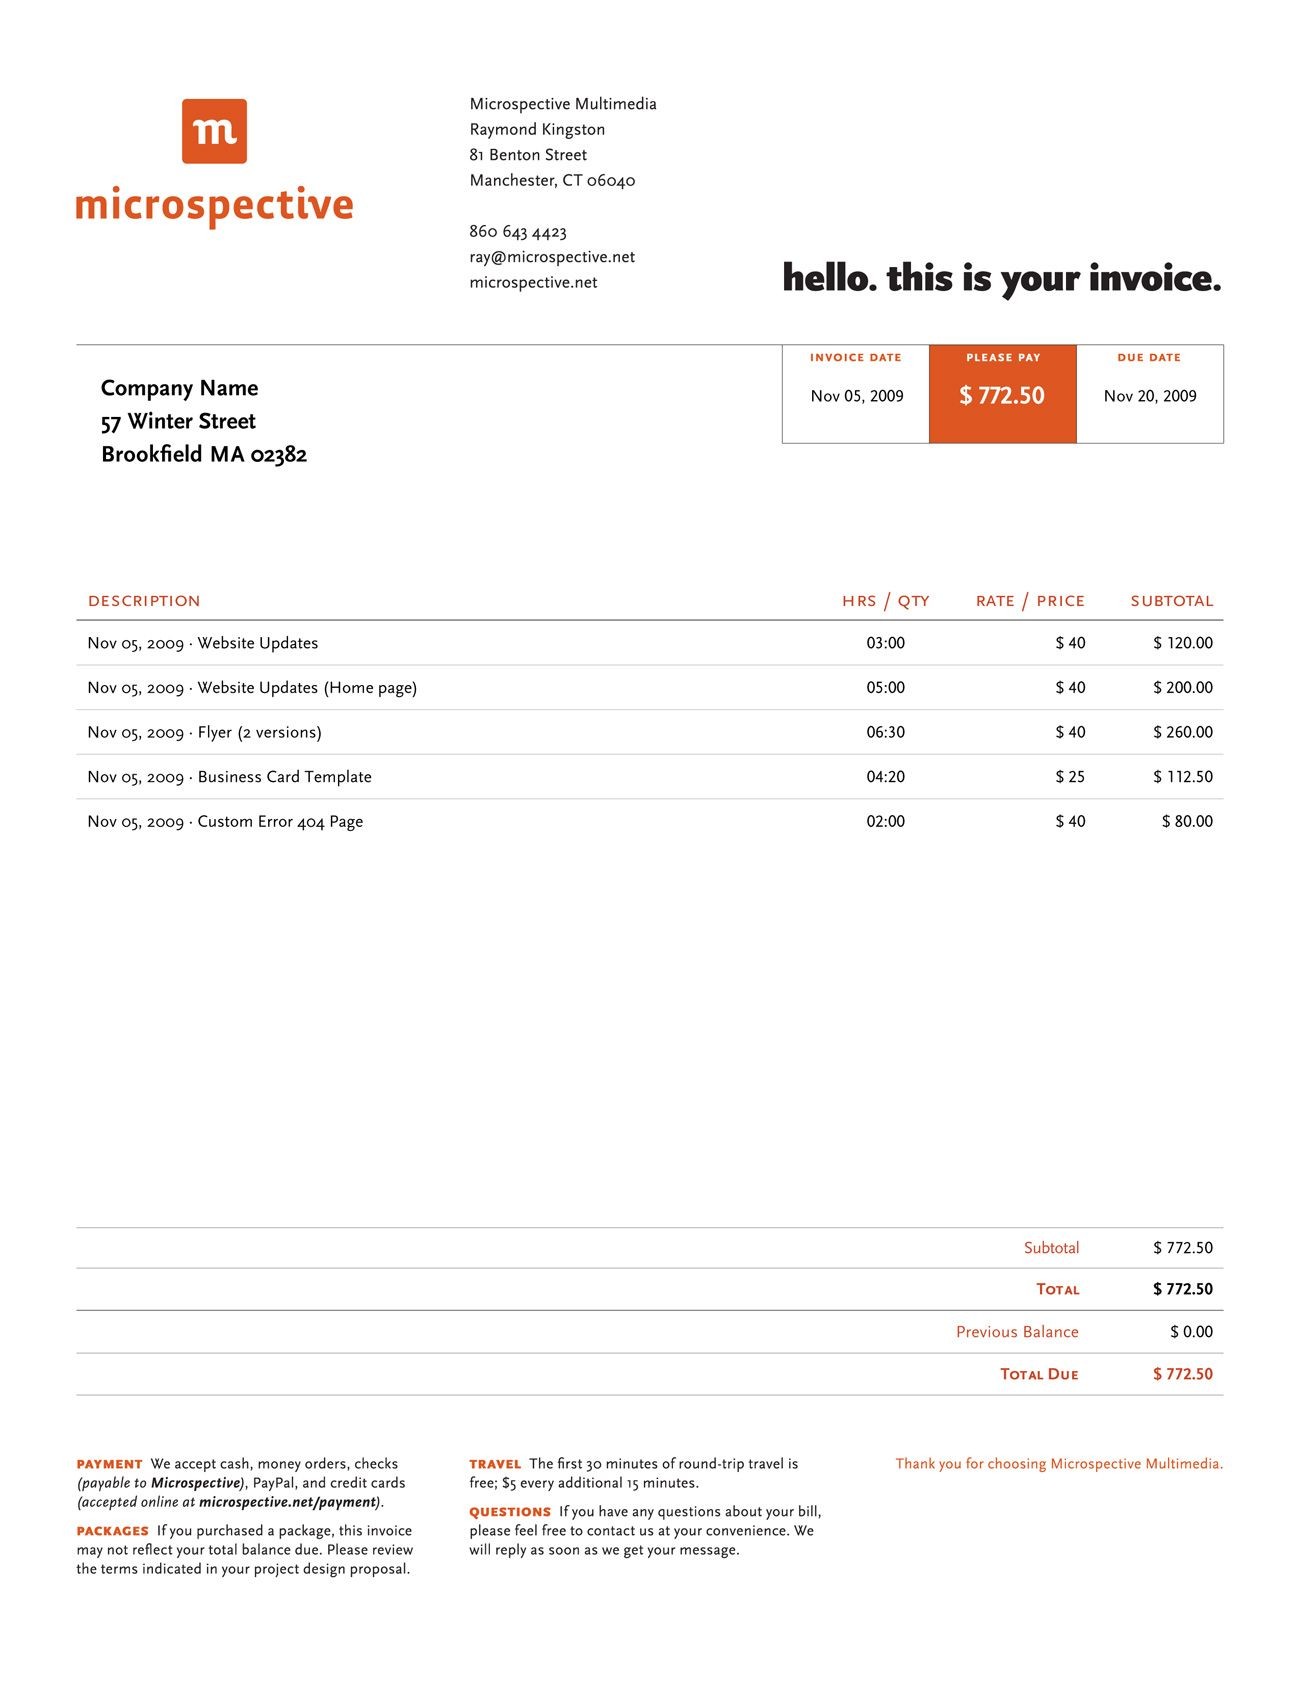 Invoice Like A Pro Design Examples And Best Practices Teaching Document Graphic Designer